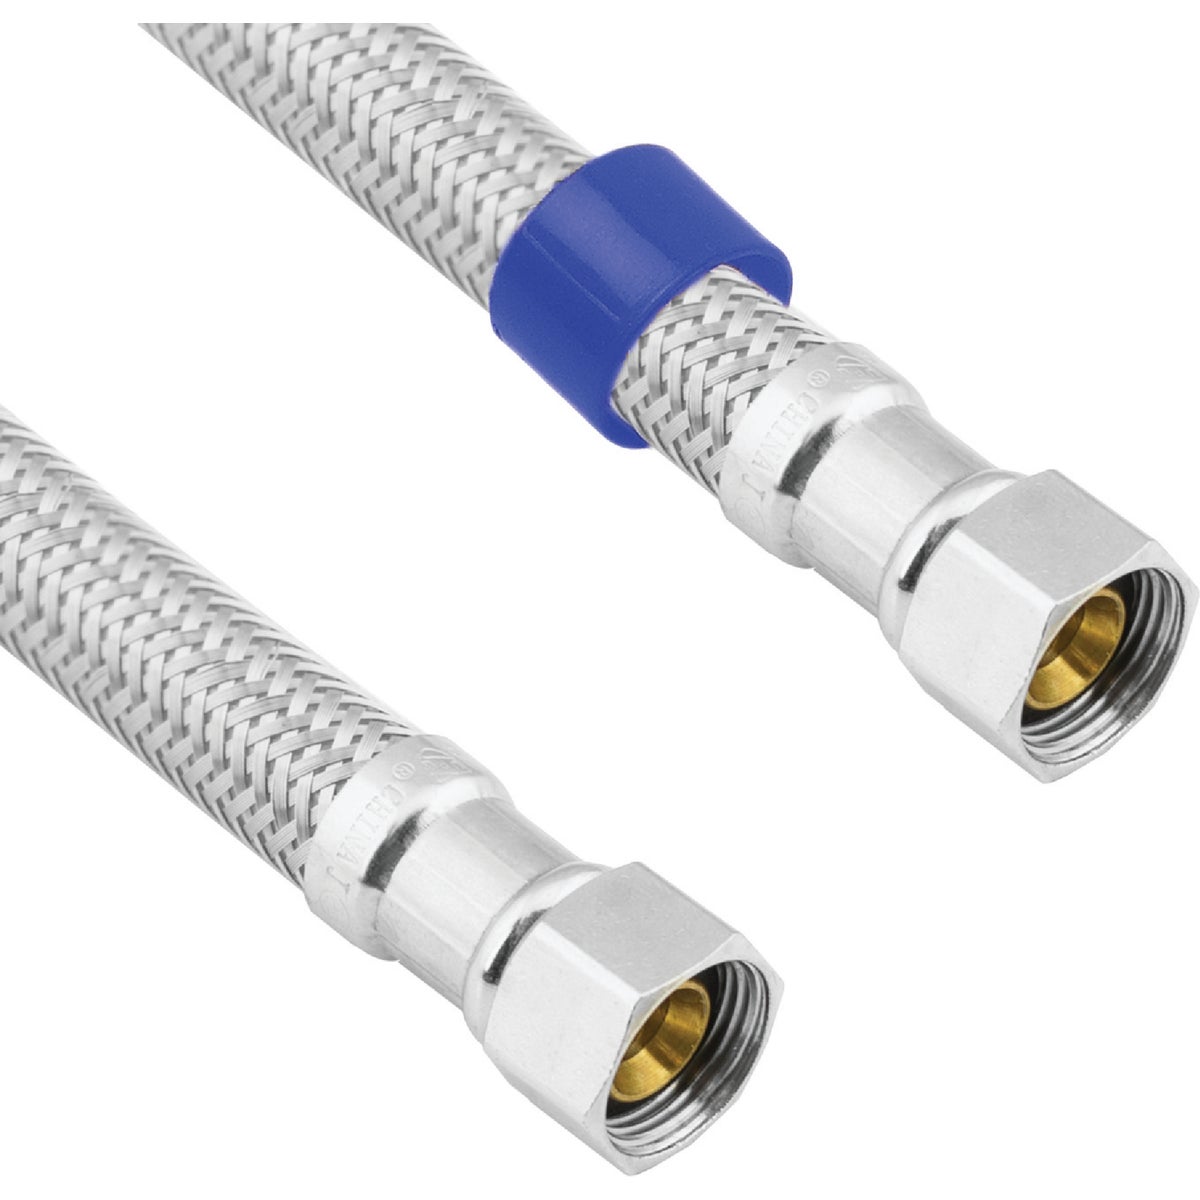 Lasco 3/8 In.C x 3/8 In.C x 60 In. L Braided Stainless Steel Flex Line Appliance Water Connector